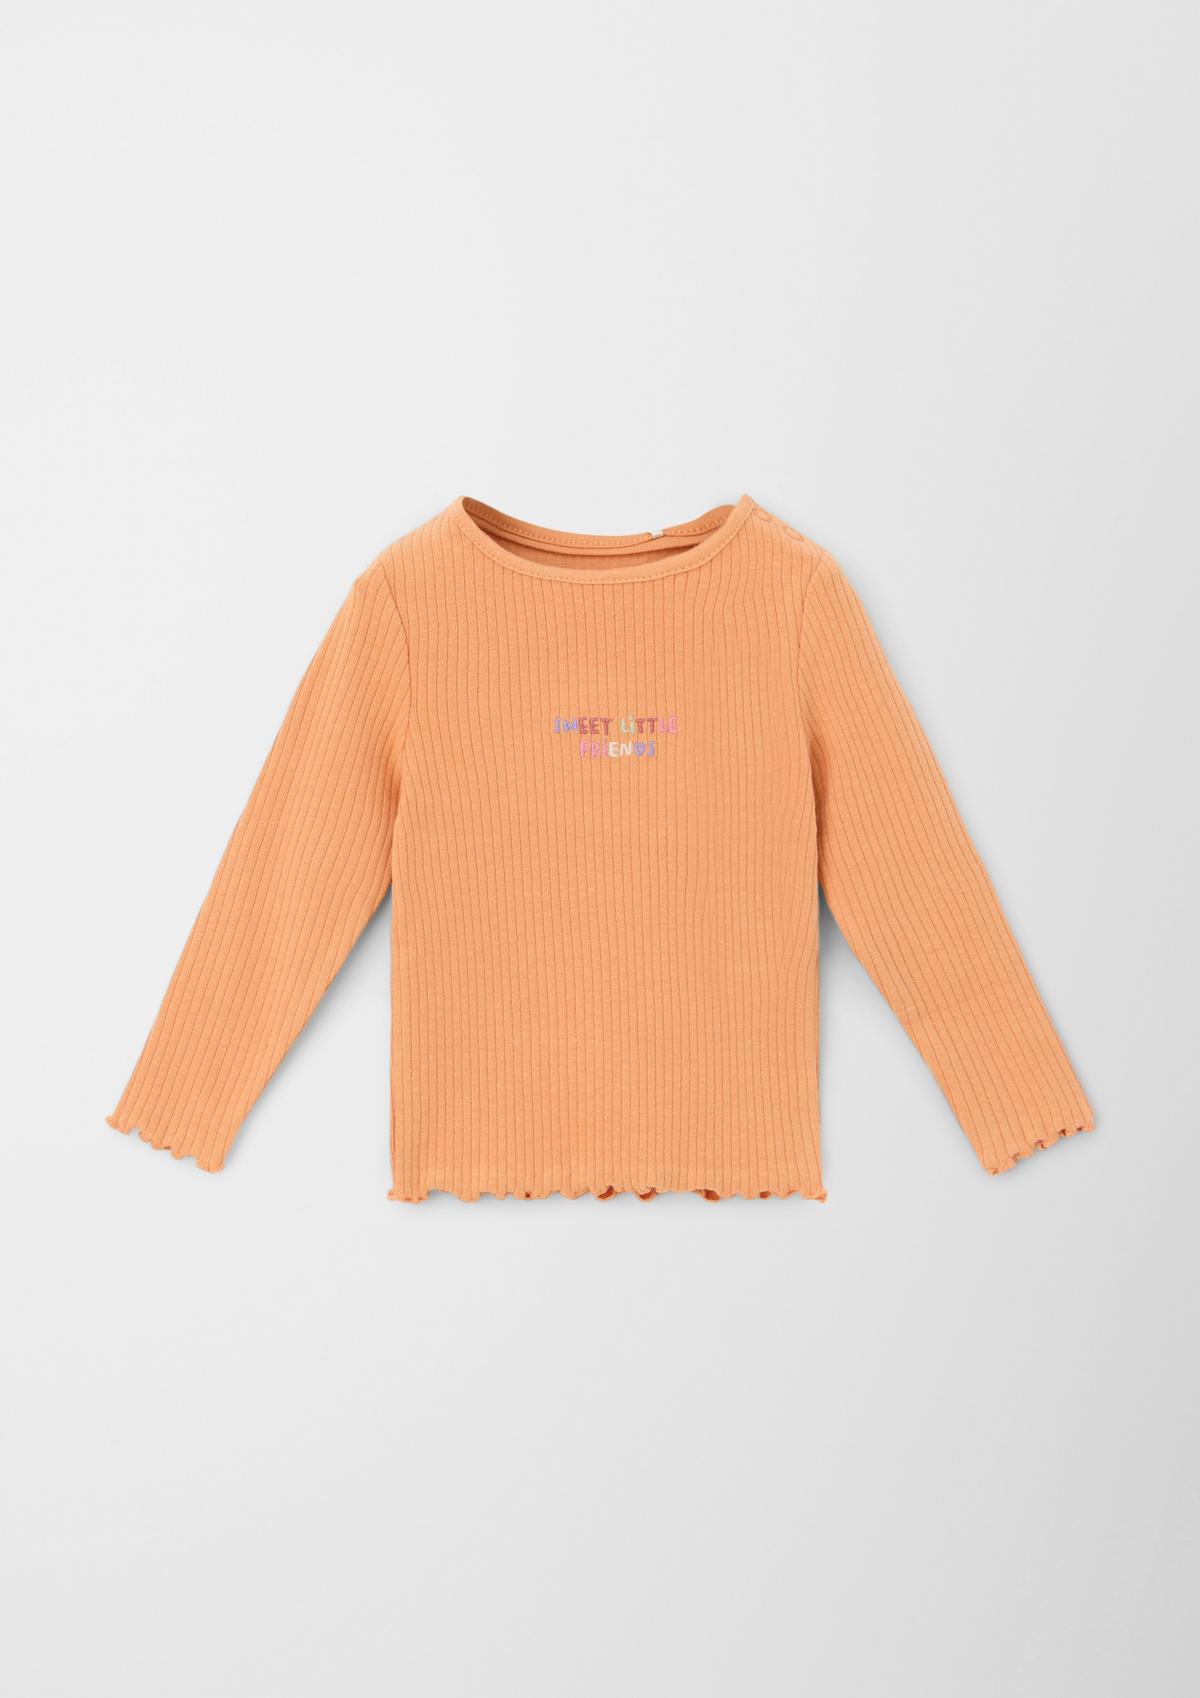 s.Oliver Long sleeve top with embroidered lettering